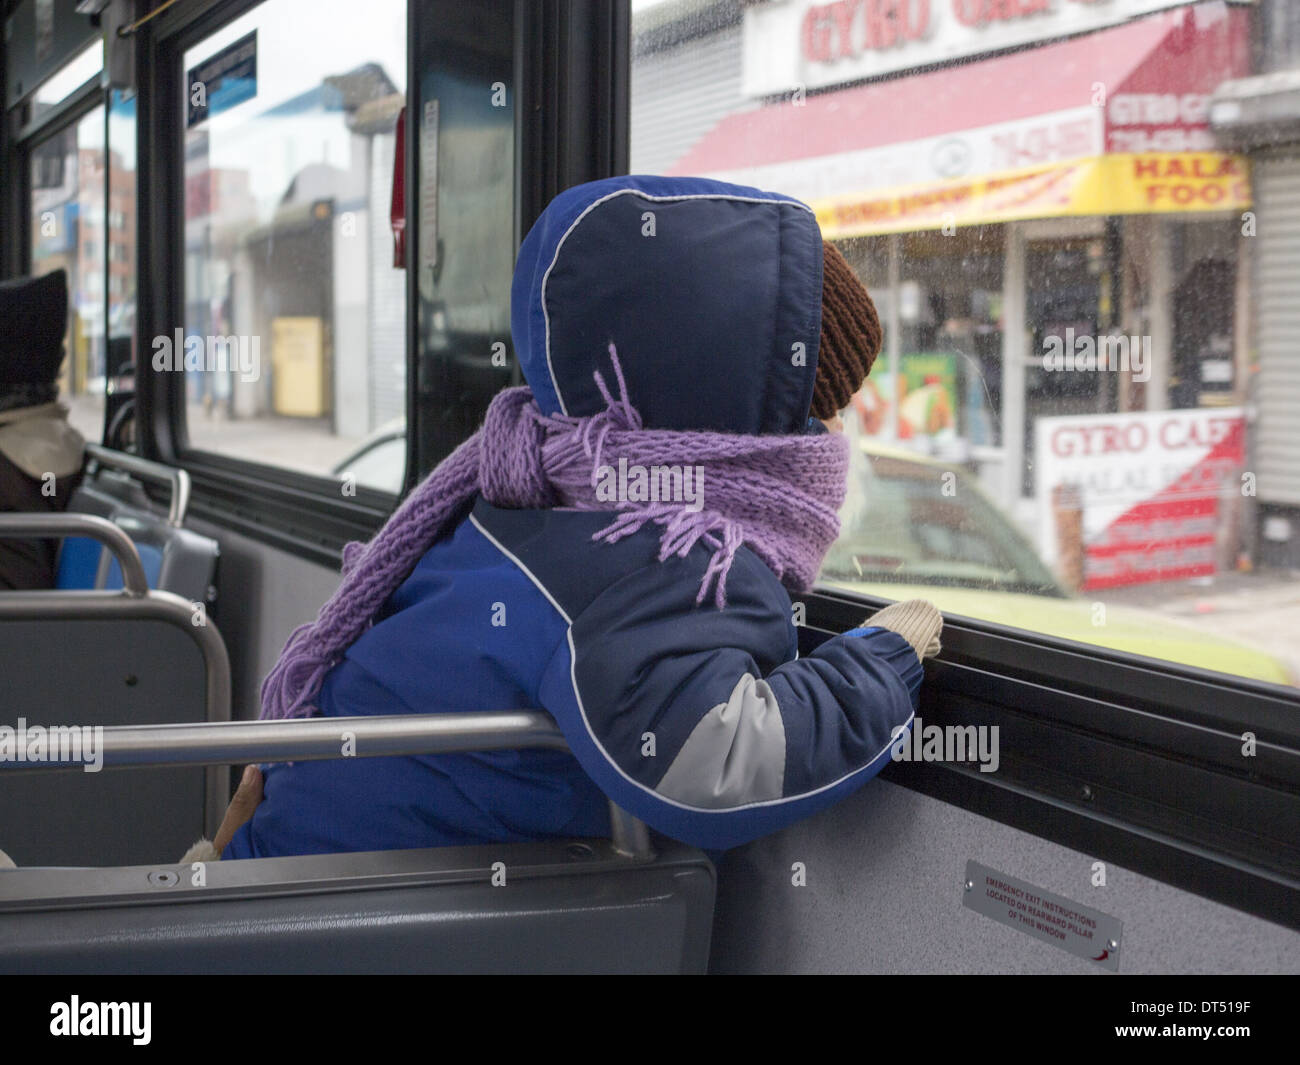 Child looks out a window on a public bus, Brooklyn, NY. Stock Photo